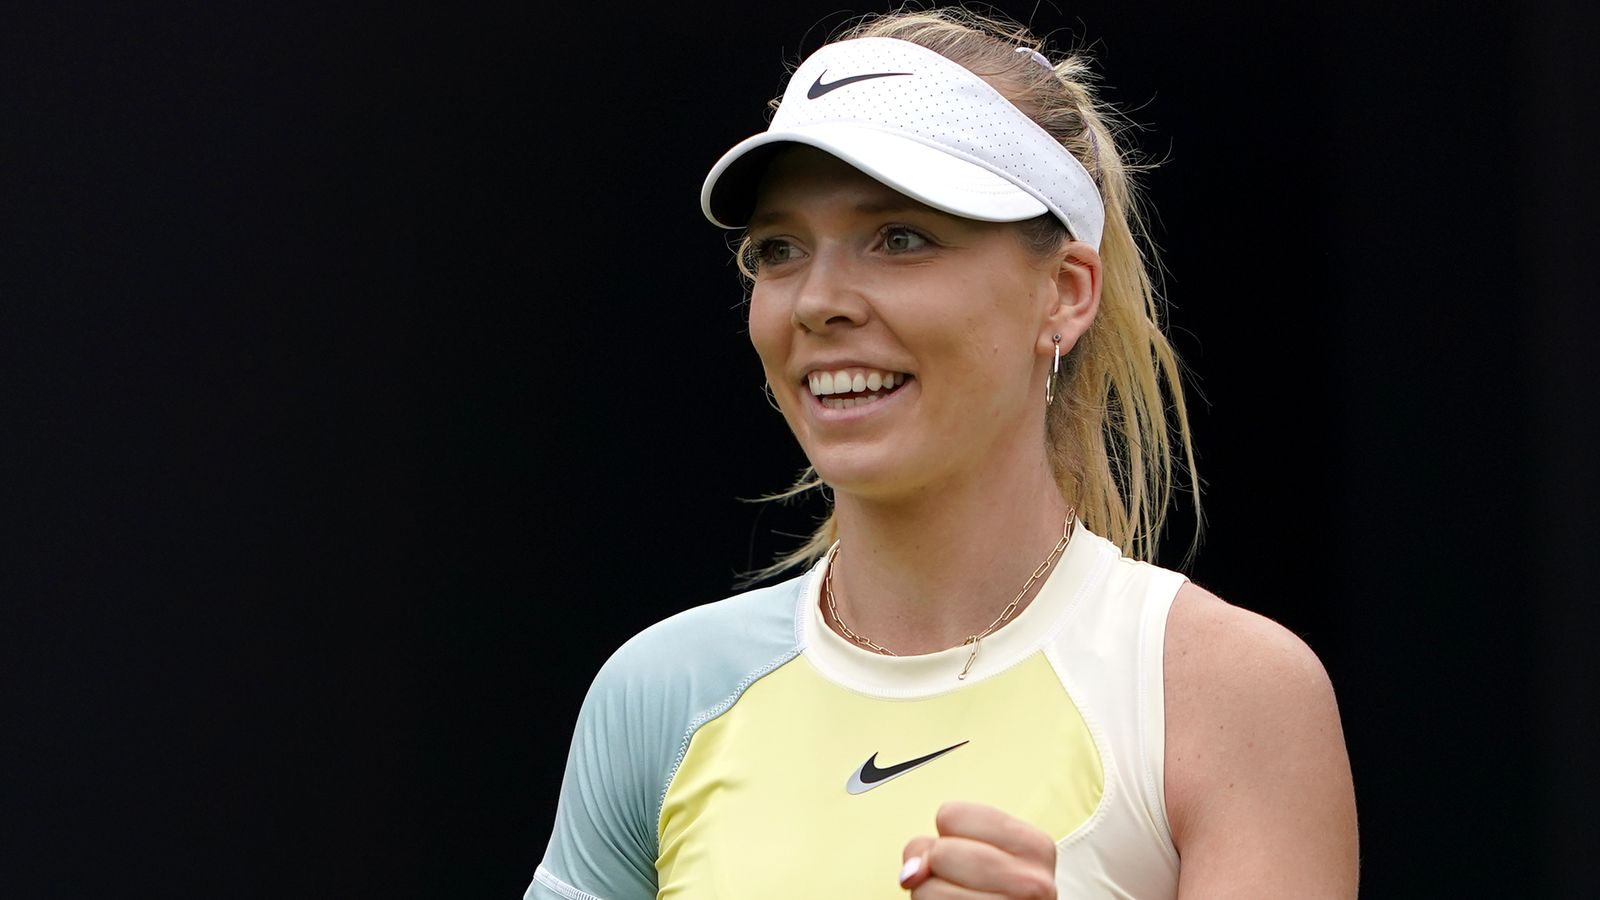 Rothesay Classic Birmingham: Katie Boulter records another milestone win to reach quarter-finals